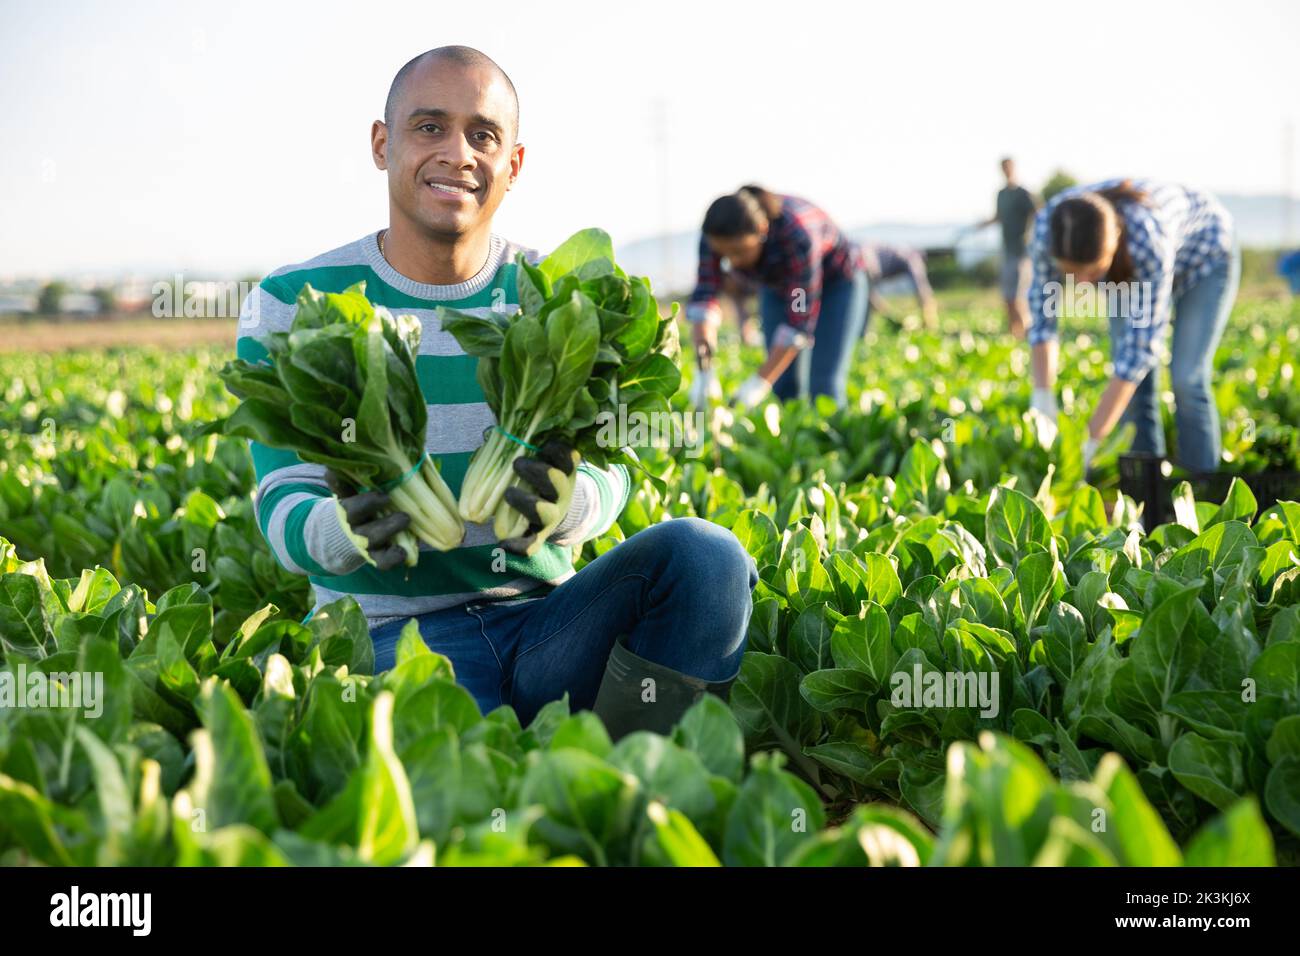 Latino male farmer showing freshly picked chard Stock Photo